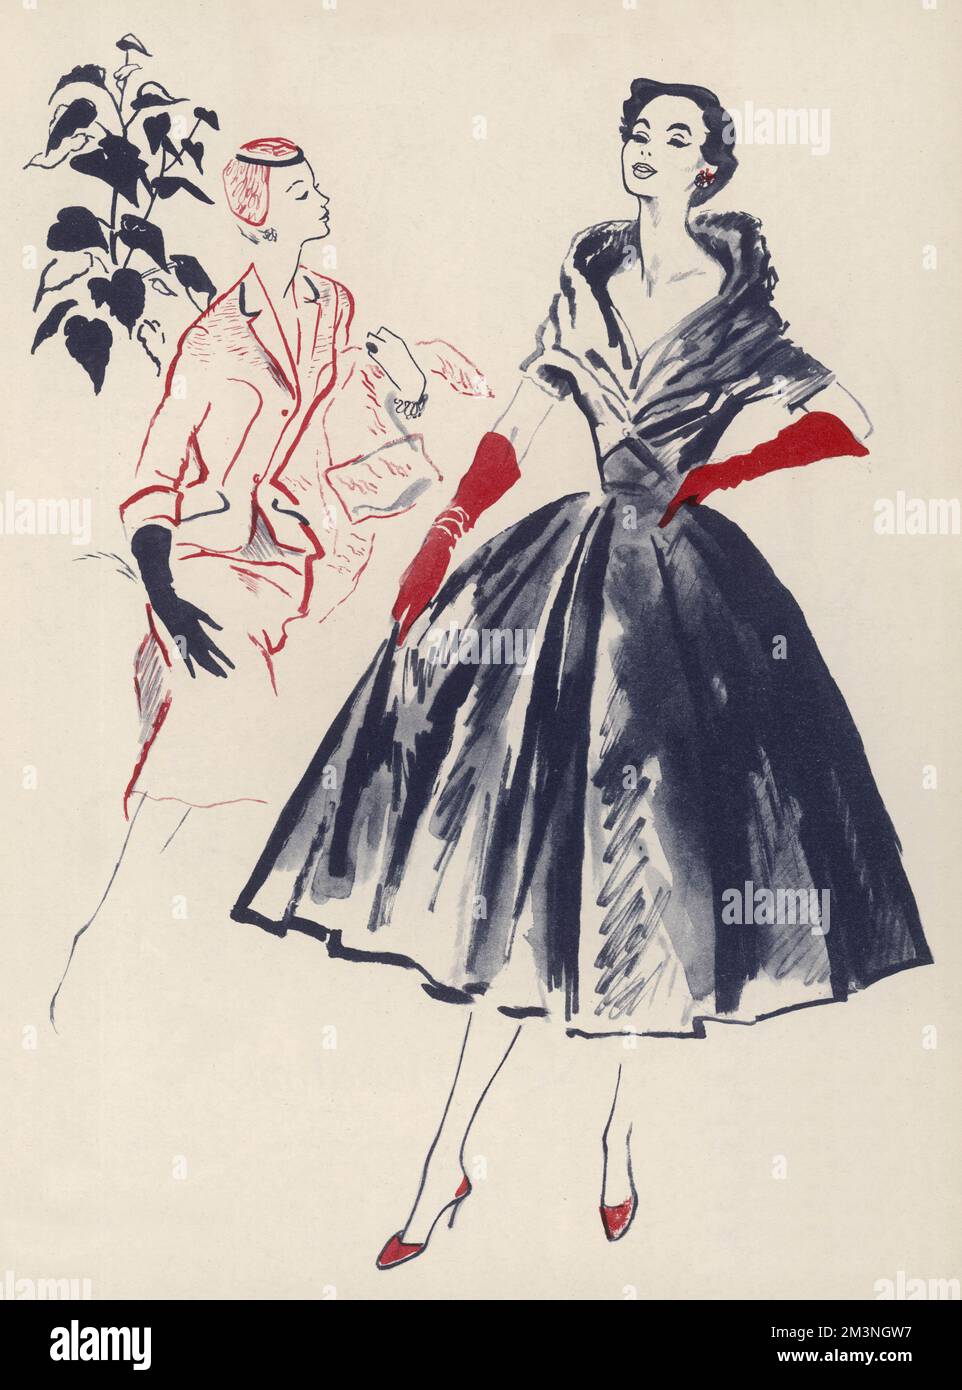 On the left, a caramel coloured restaurant suit in heavy silk shantung, its melting shoulder line, vertically seamed jacket, slanting pockets 'are all allies for your pleasant evening'.  On the right, a New Look dress by Christian Dior in black paper taffeta with an alluring bell skirt and the tiniest of spencer jackets curving into an enormous draped collar.     Date: 1954 Stock Photo